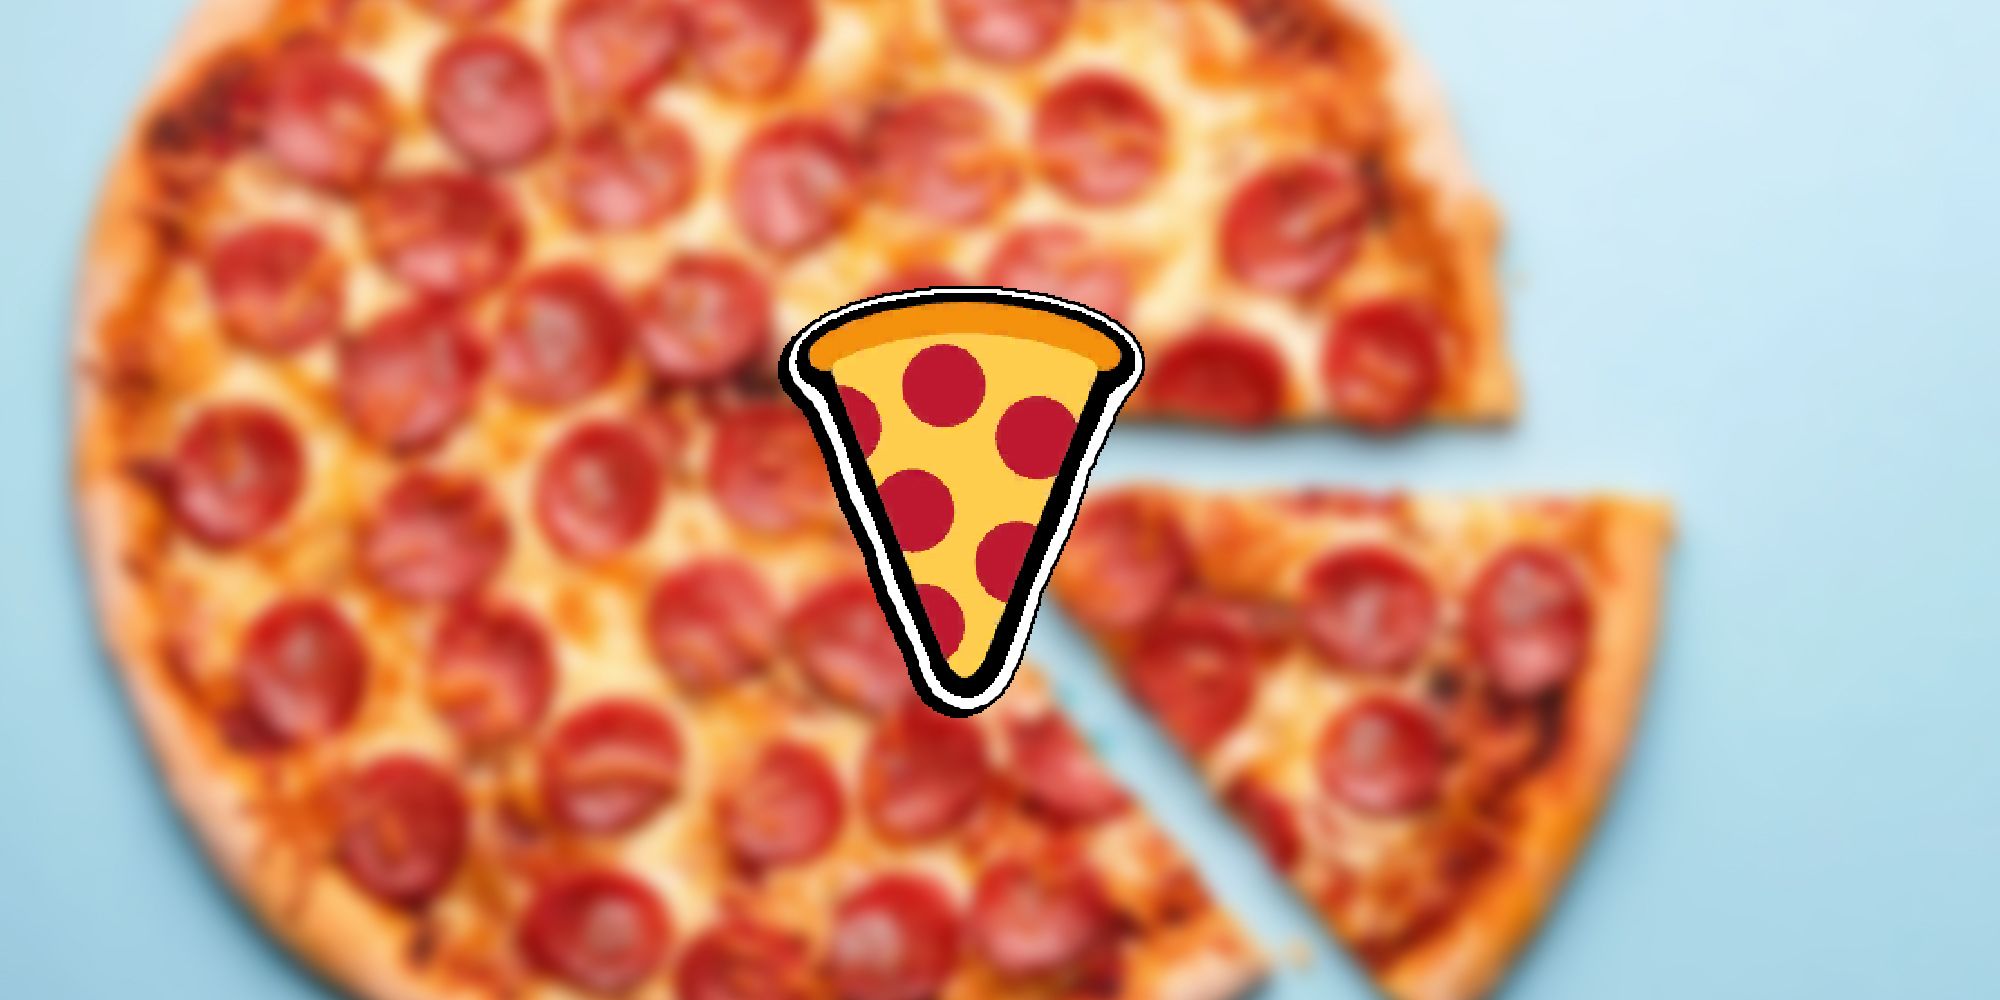 Super Auto Pets - In-Game Pizza Item Overlaid On Image Of Full Pepperoni Pizza